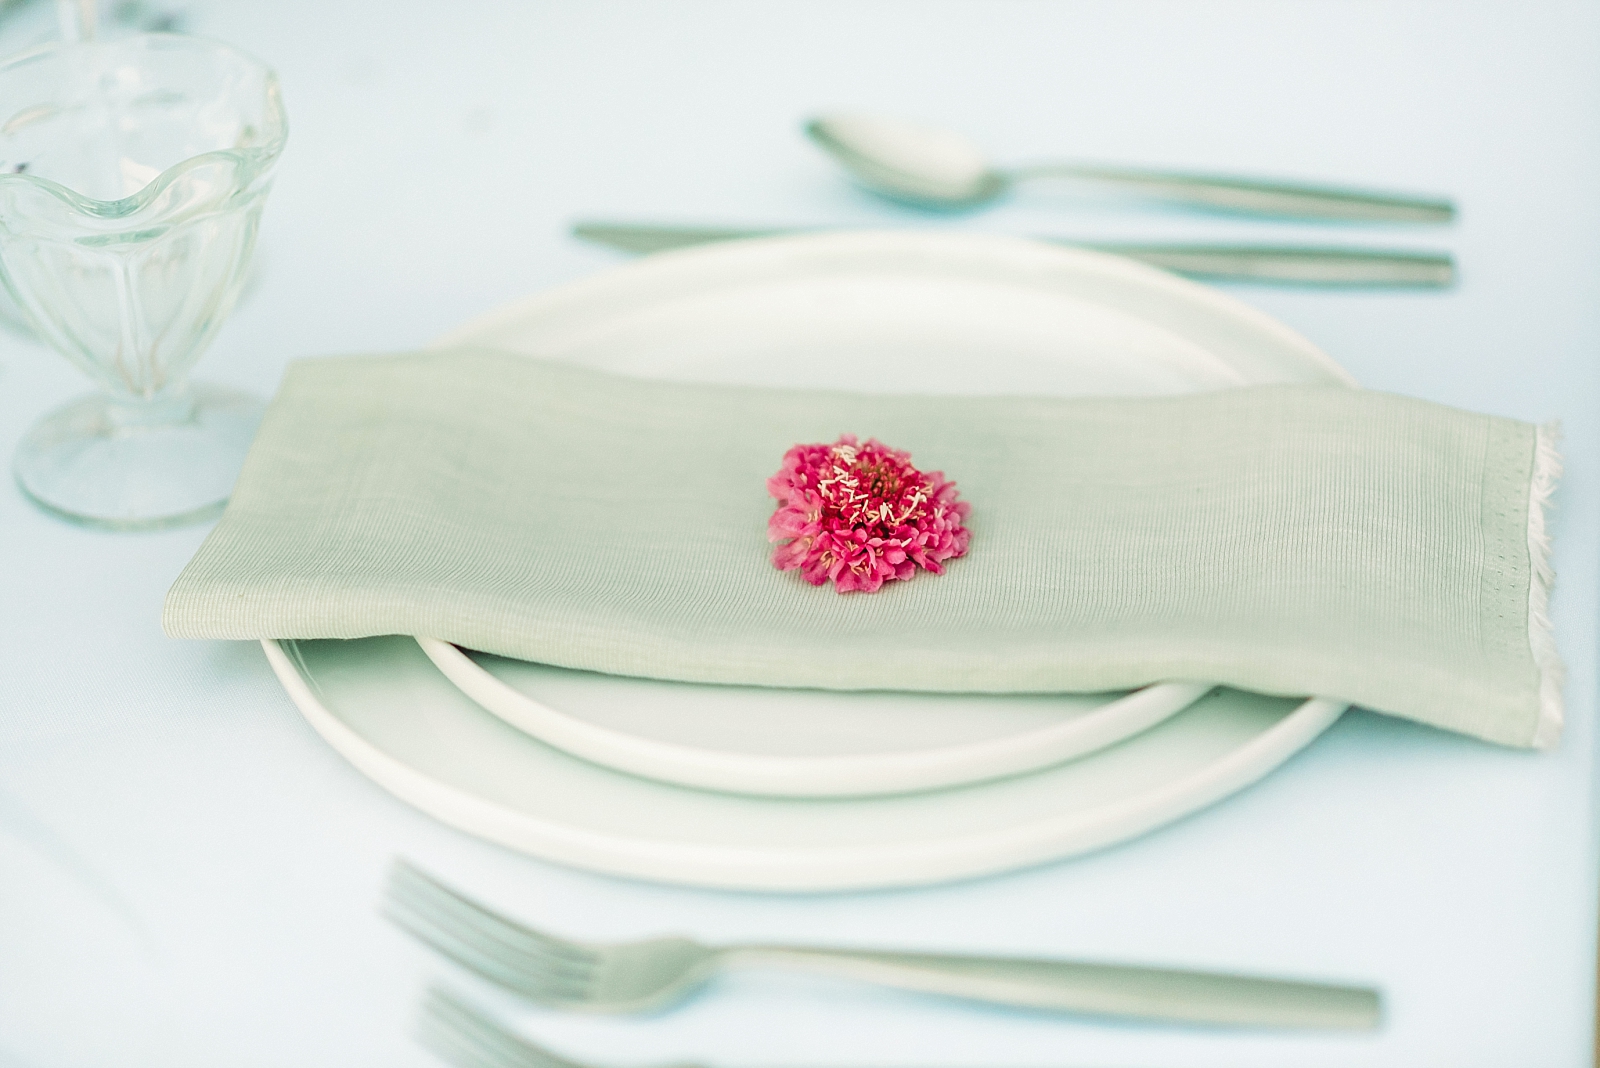 wedding table decor with white plates and single pink flower on table